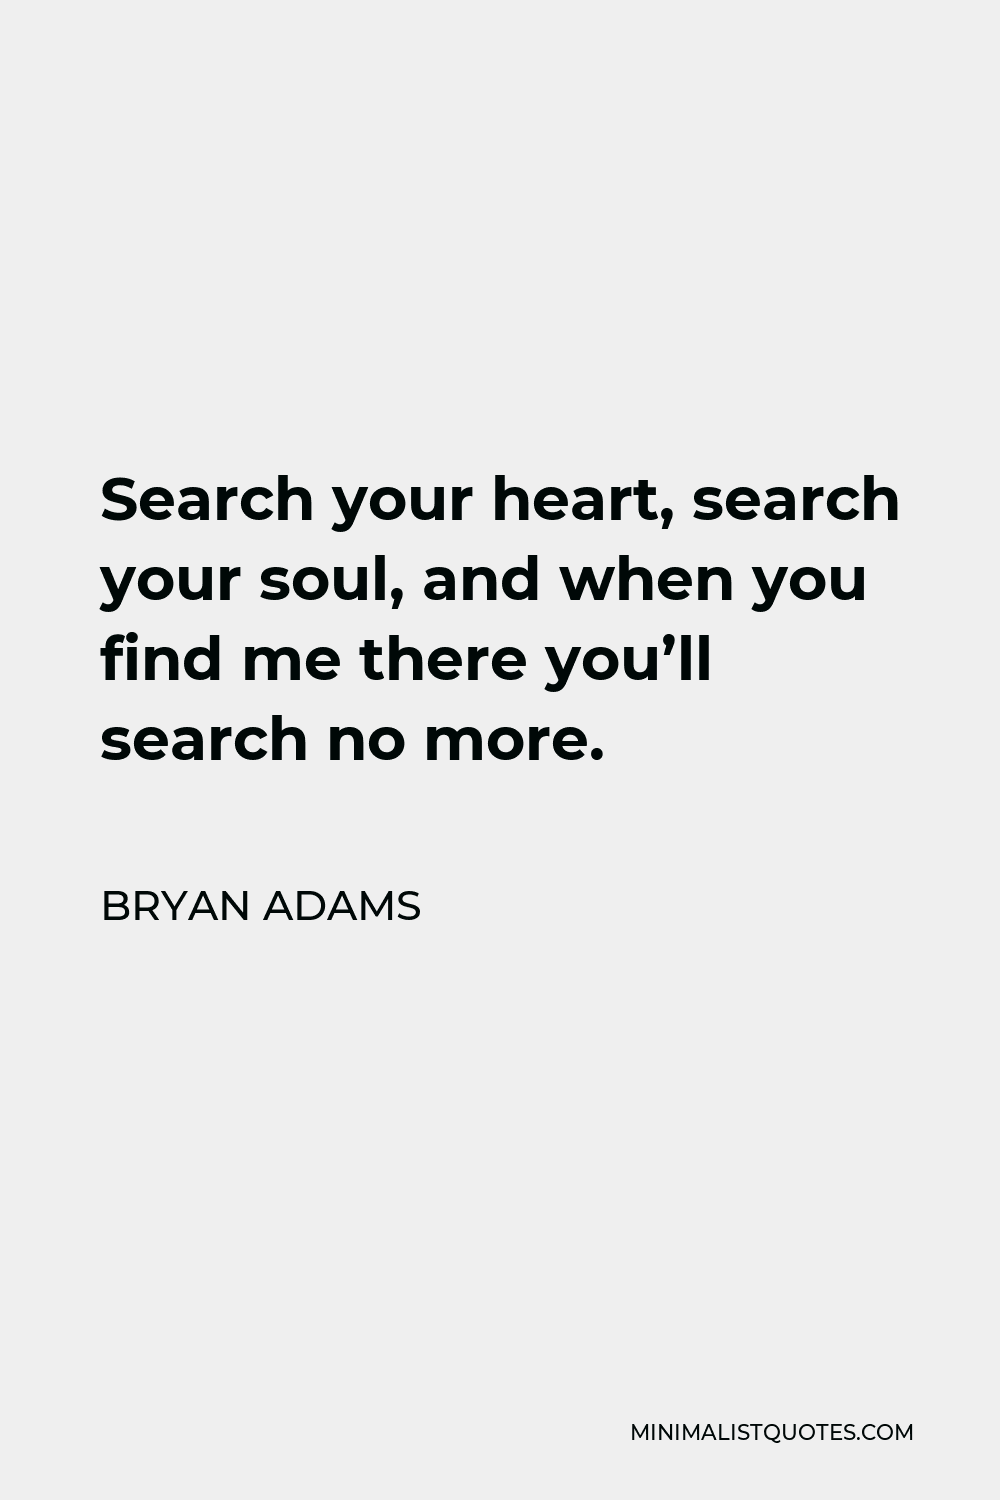 Bryan Adams Quote - Search your heart, search your soul, and when you find me there you’ll search no more.